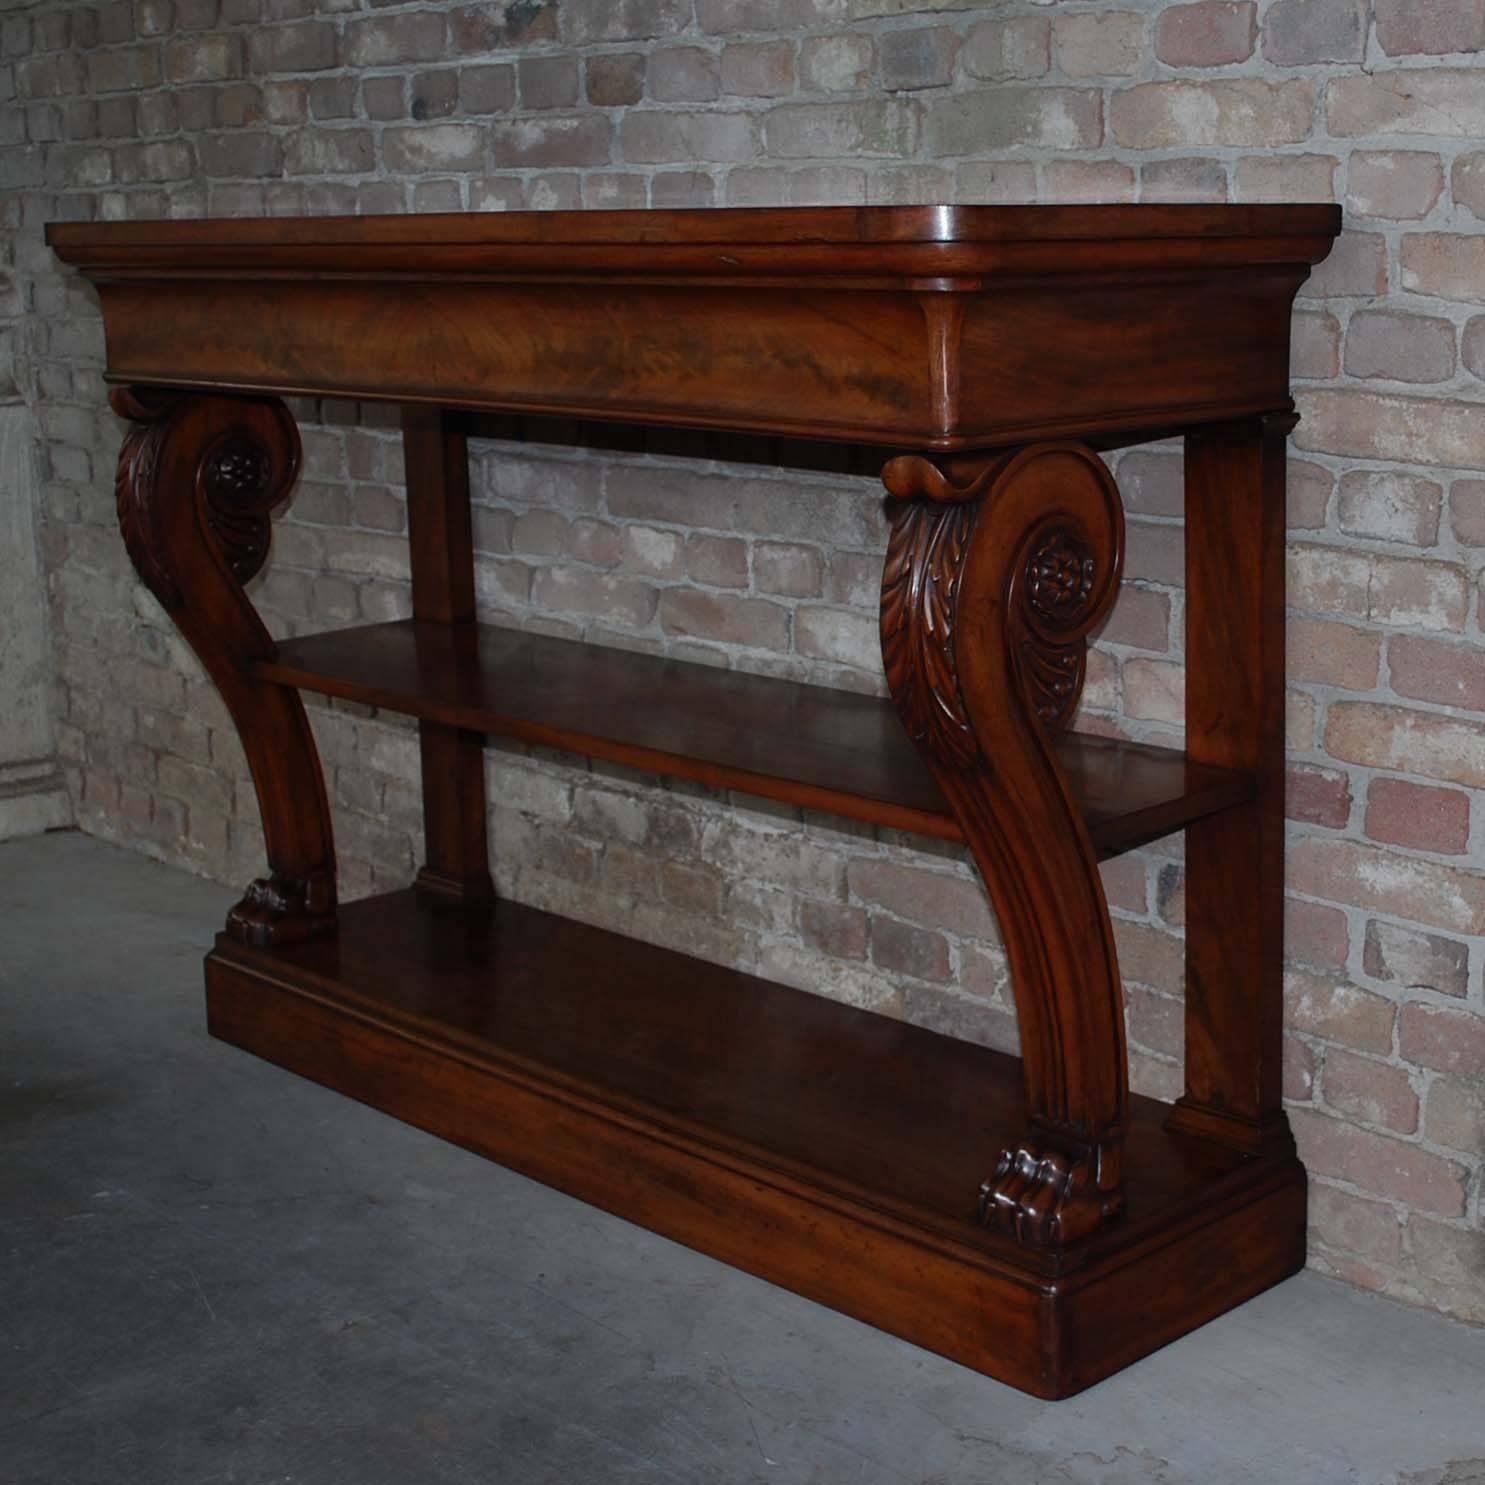 19th century Regency mahogany pedestal sideboard in excellent condition.
It has two finely carved scrolling legs ending in carved claw feet.
Originates England, dating app. 1840.